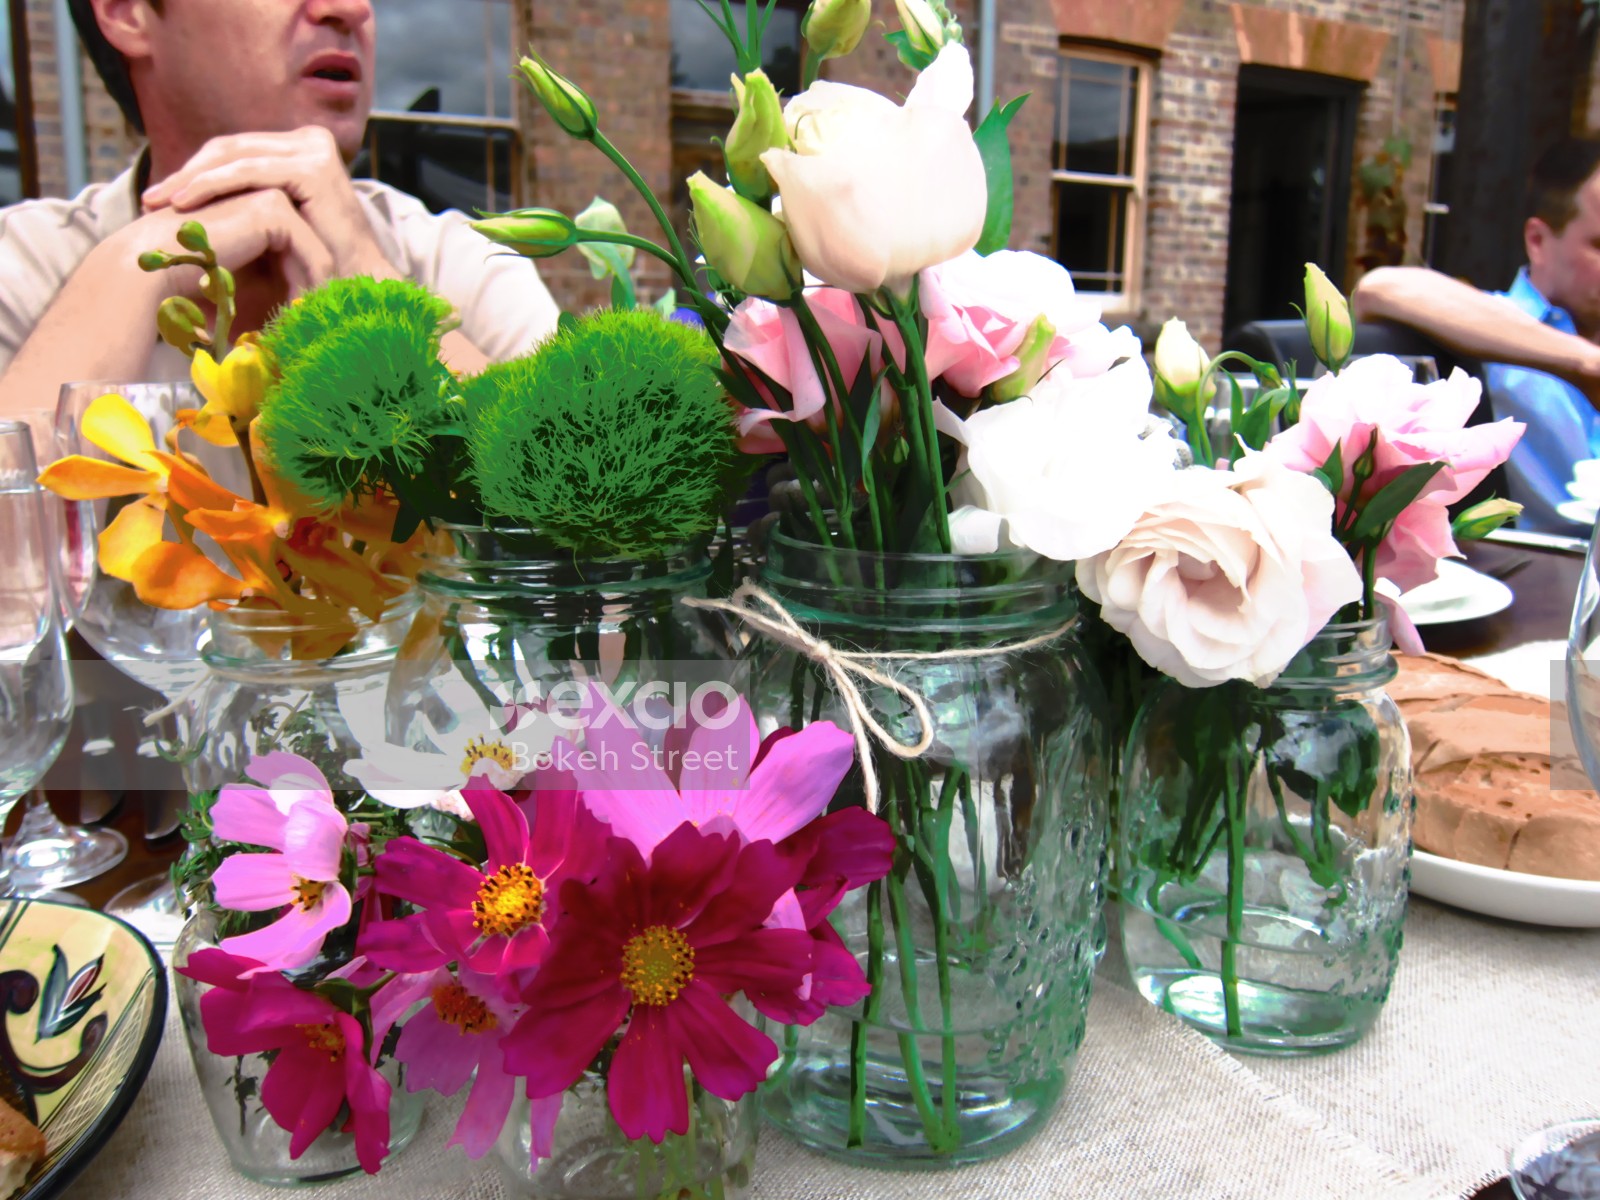 Flowers and vases setting on a table